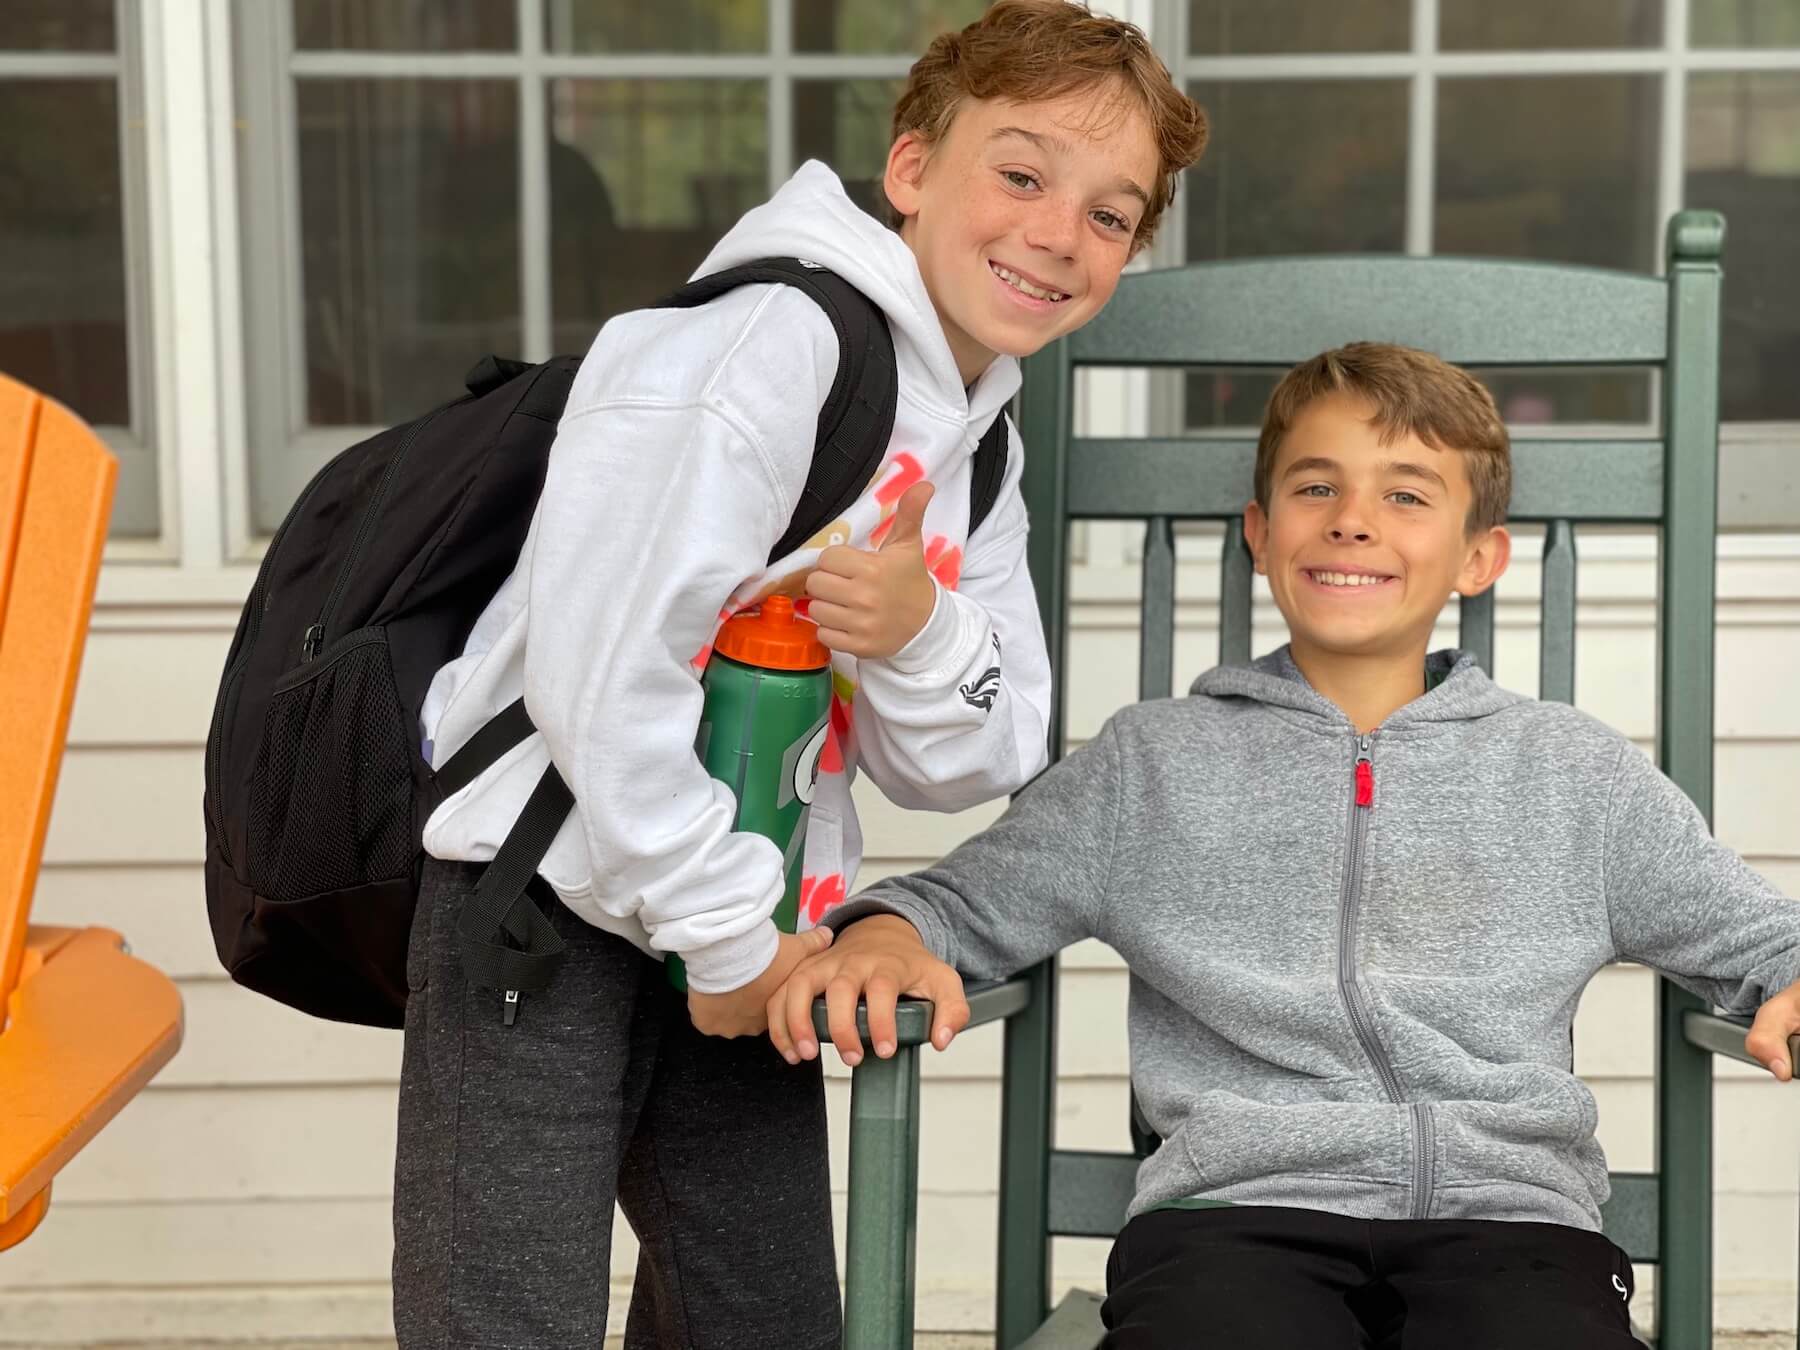 Two Ethical Culture 5th Graders smile at camera on front porch of building. One student sits in a rocking chair, the other is standing.